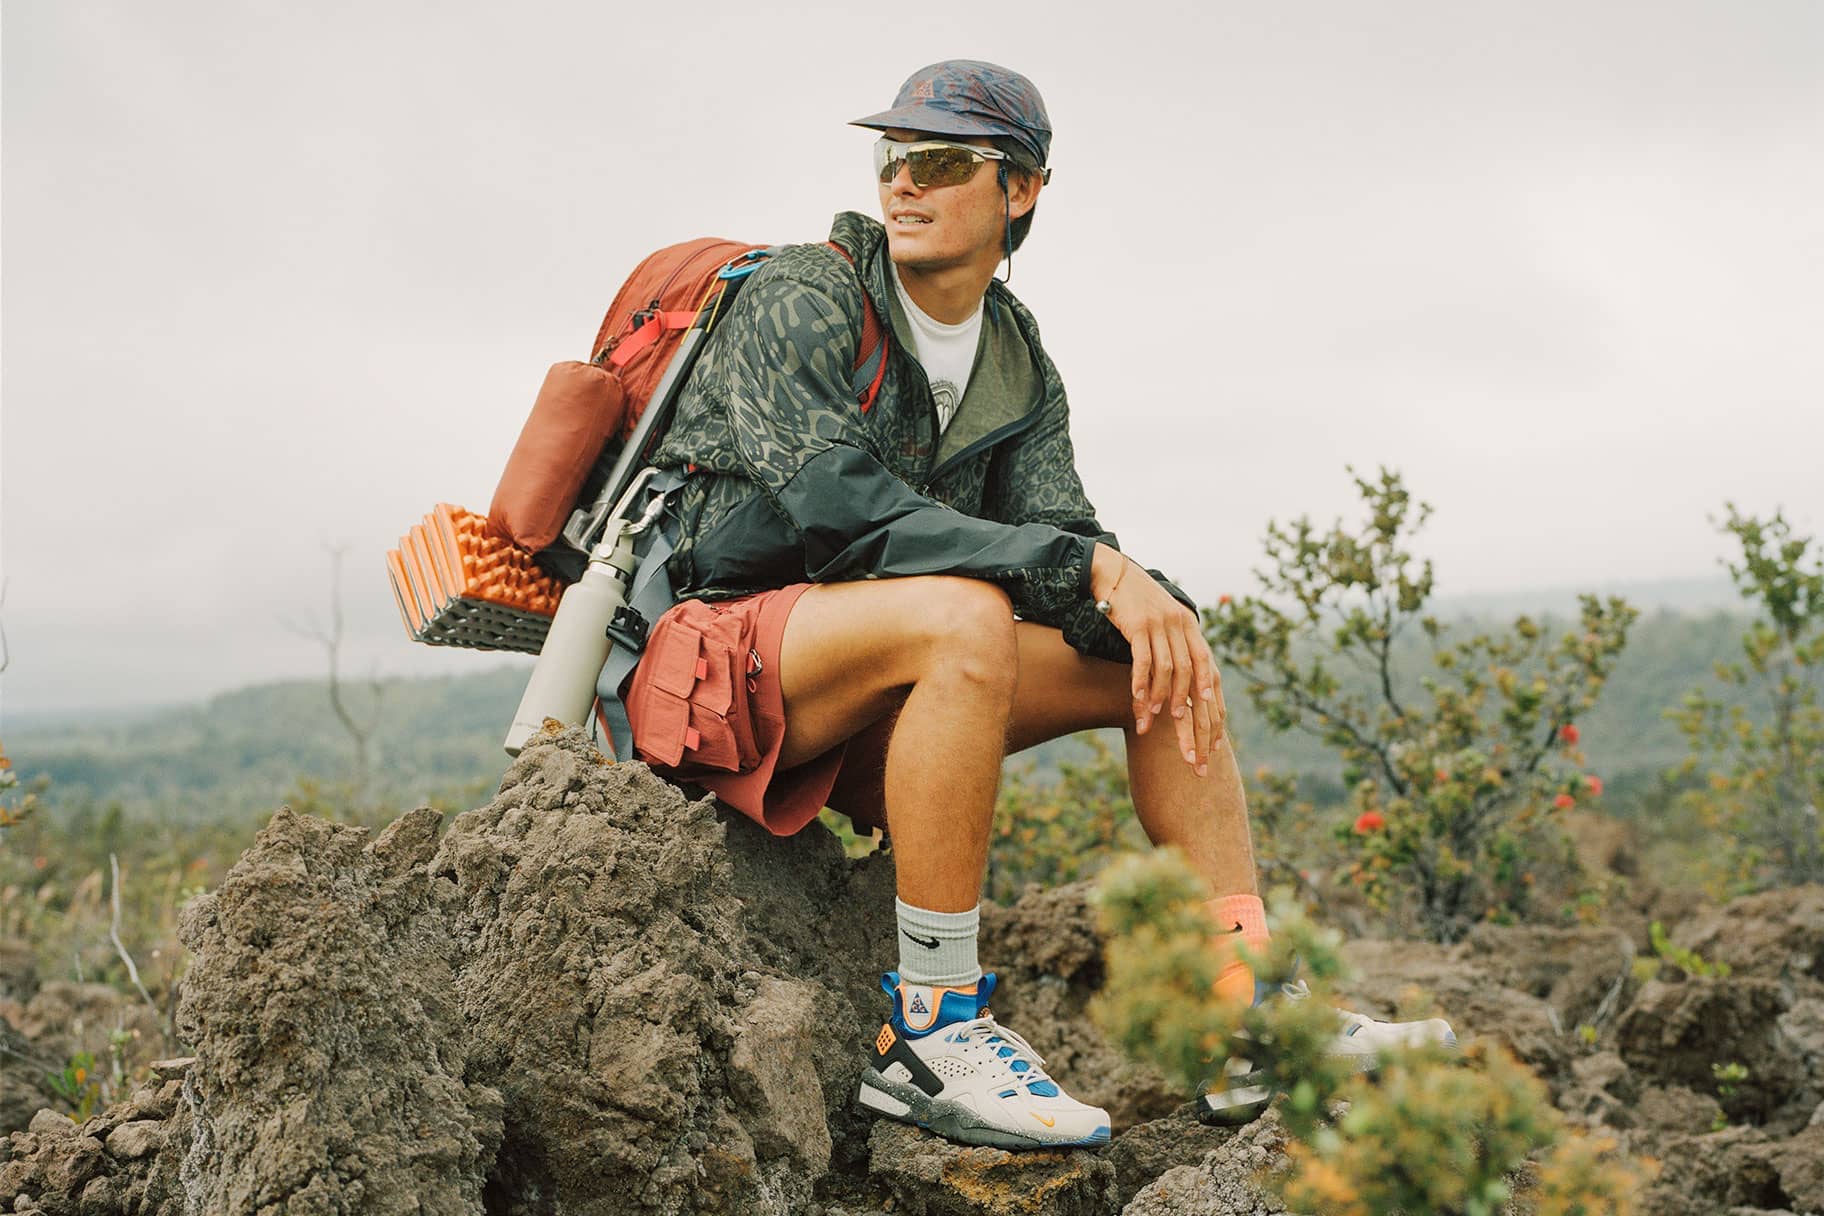 The Best Camping Outfits for Men and Women. Nike LU